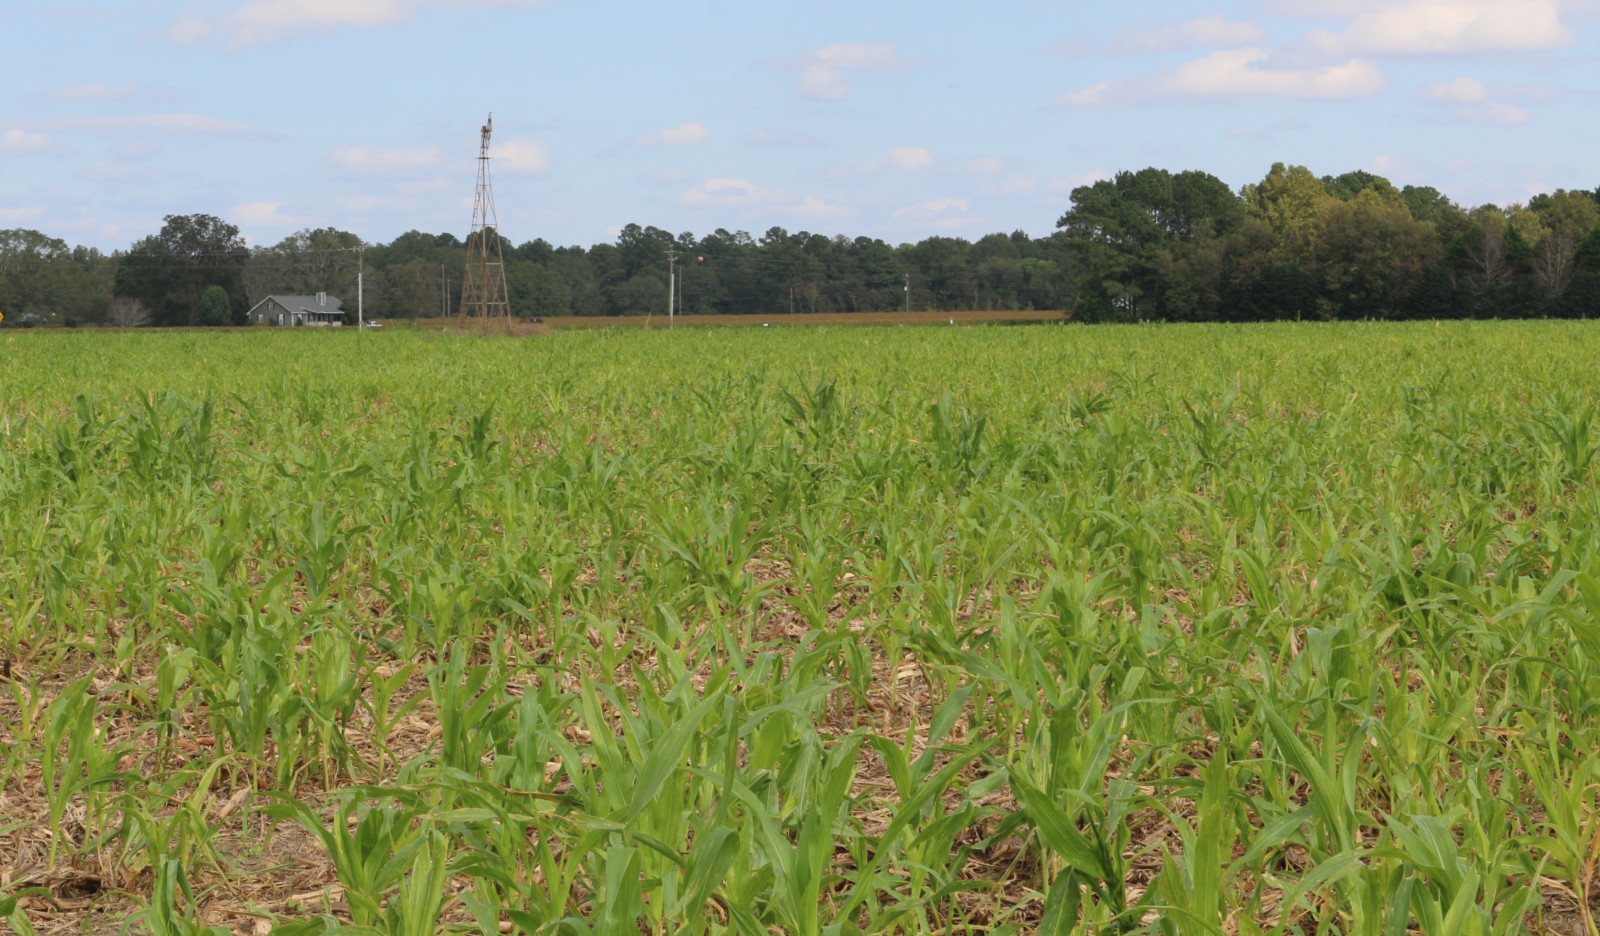 Jason Carver has been planting cover crops on his farm near Eastover for seven years.